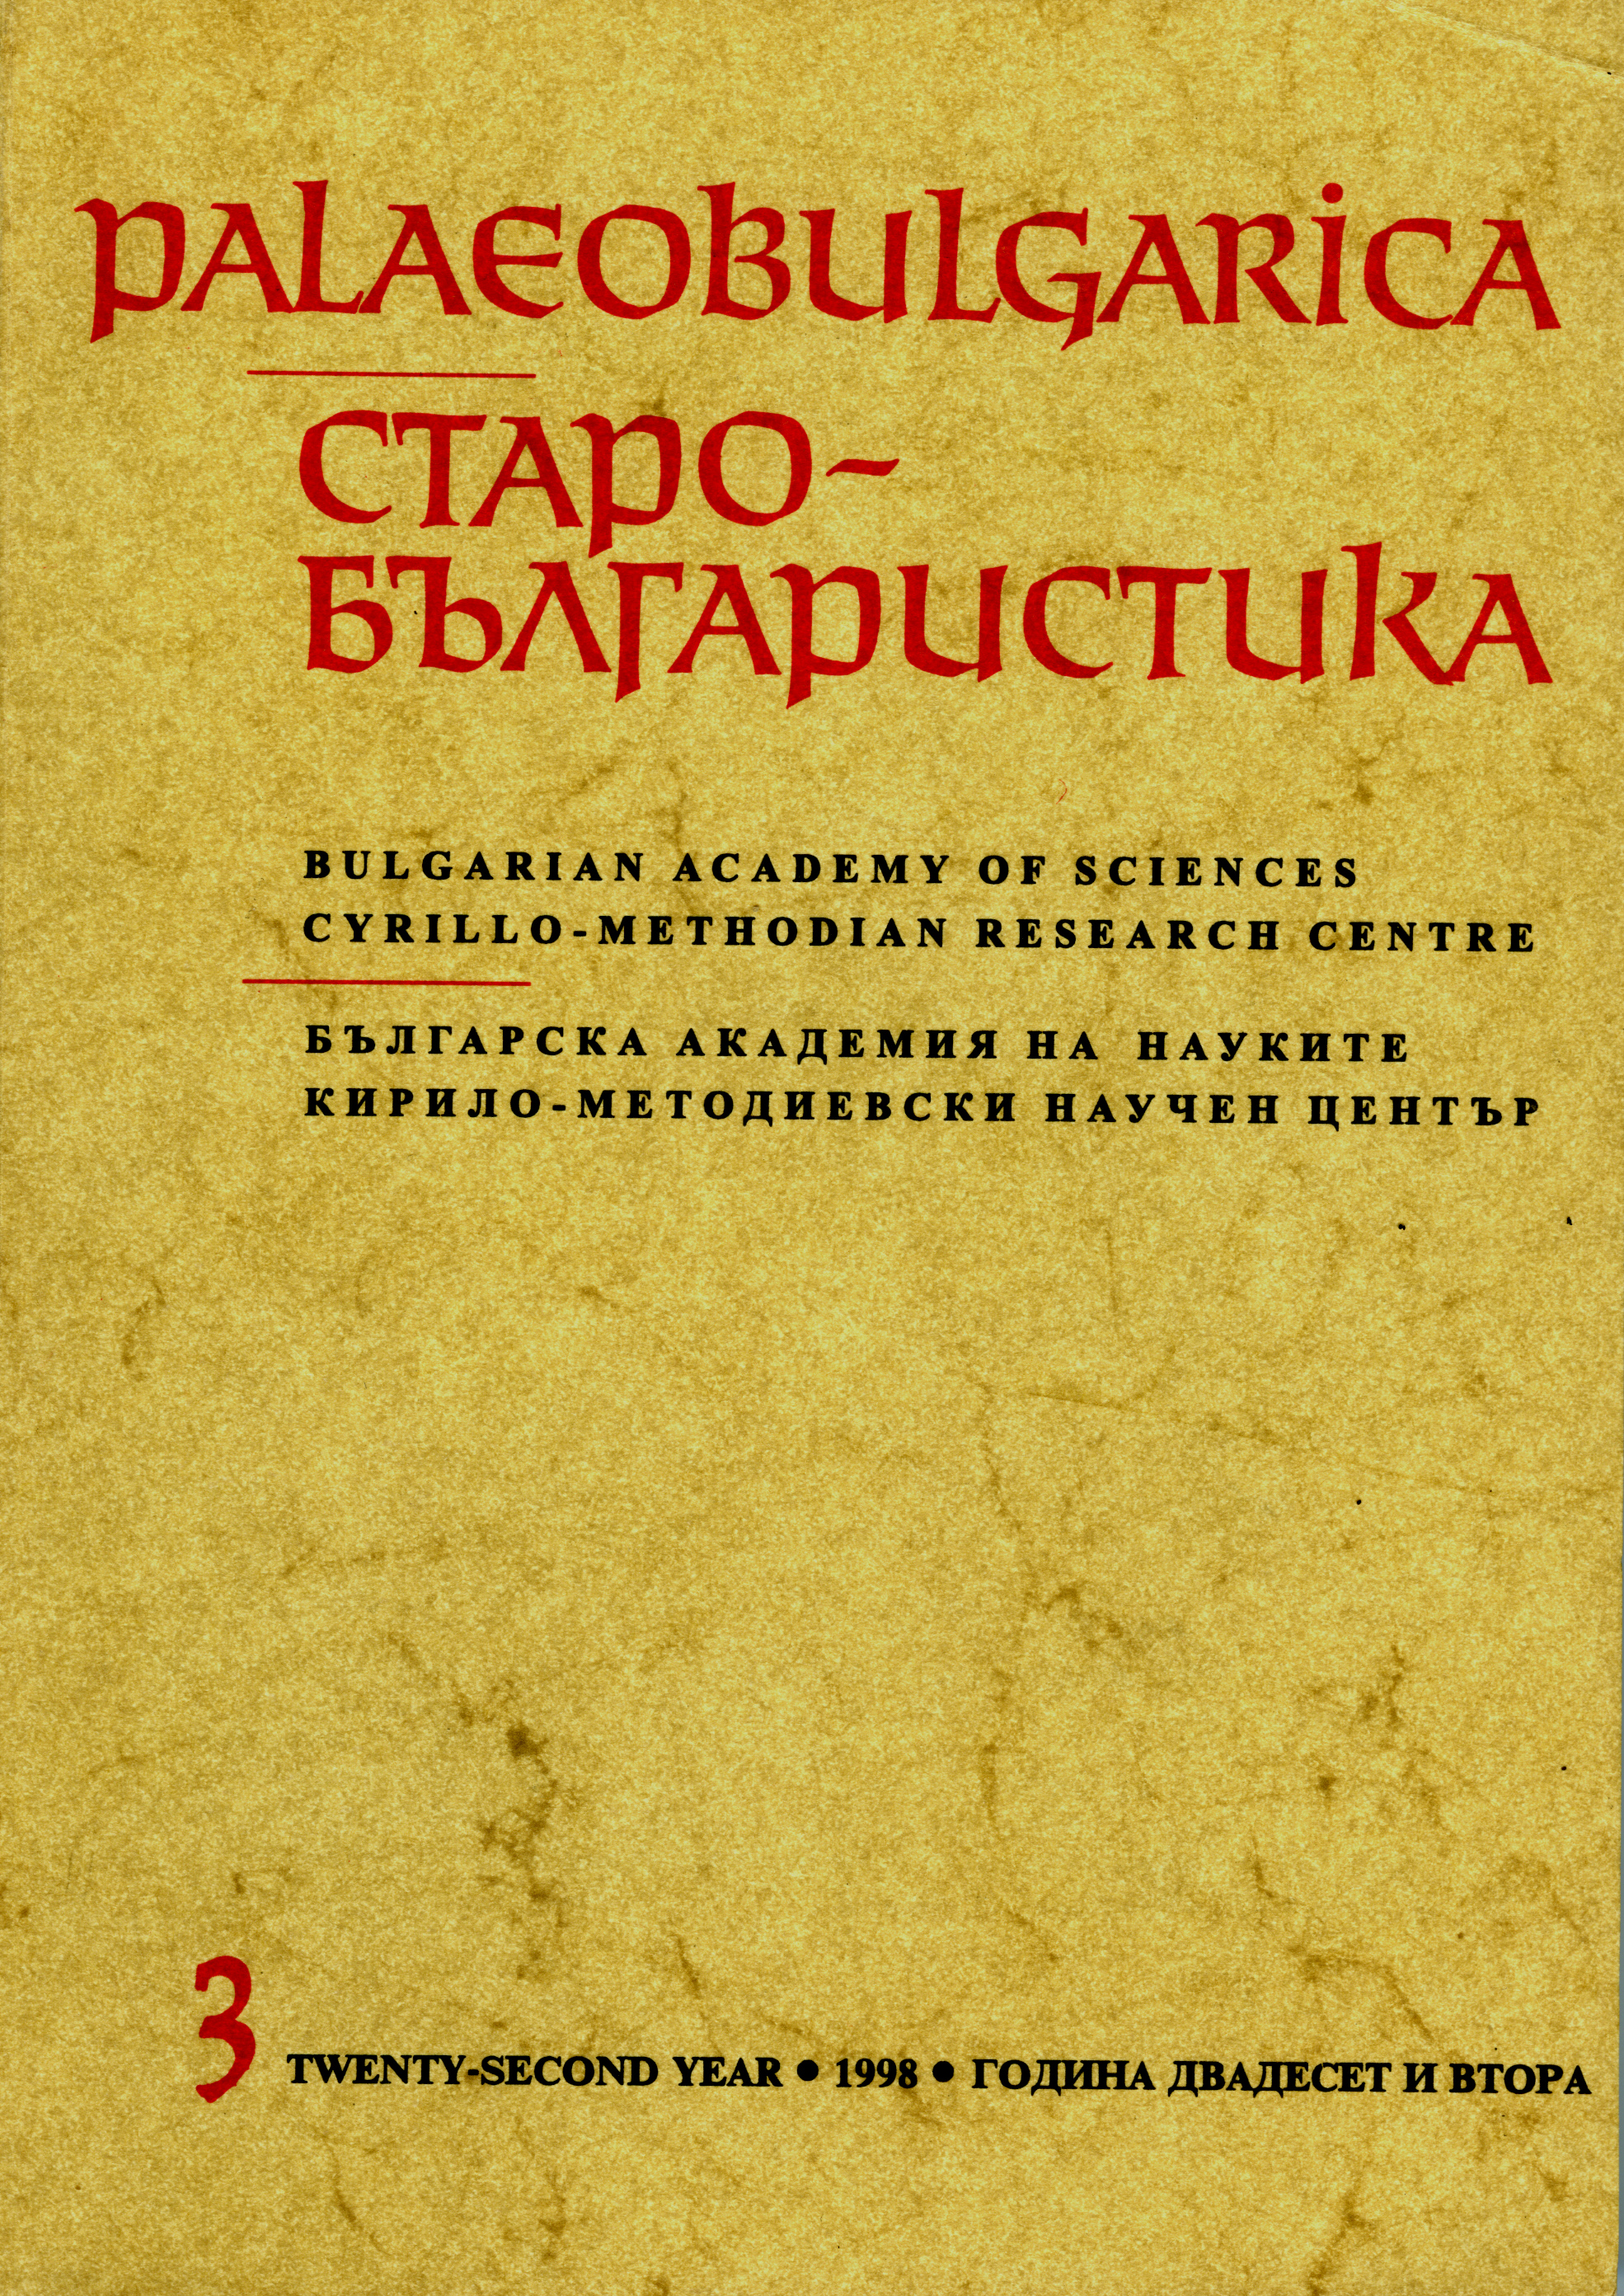 Ownership Inscriptions on Toreutic Works of the Old Bulgarian and Middle Bulgarian Ages (9th-14th c.) Cover Image